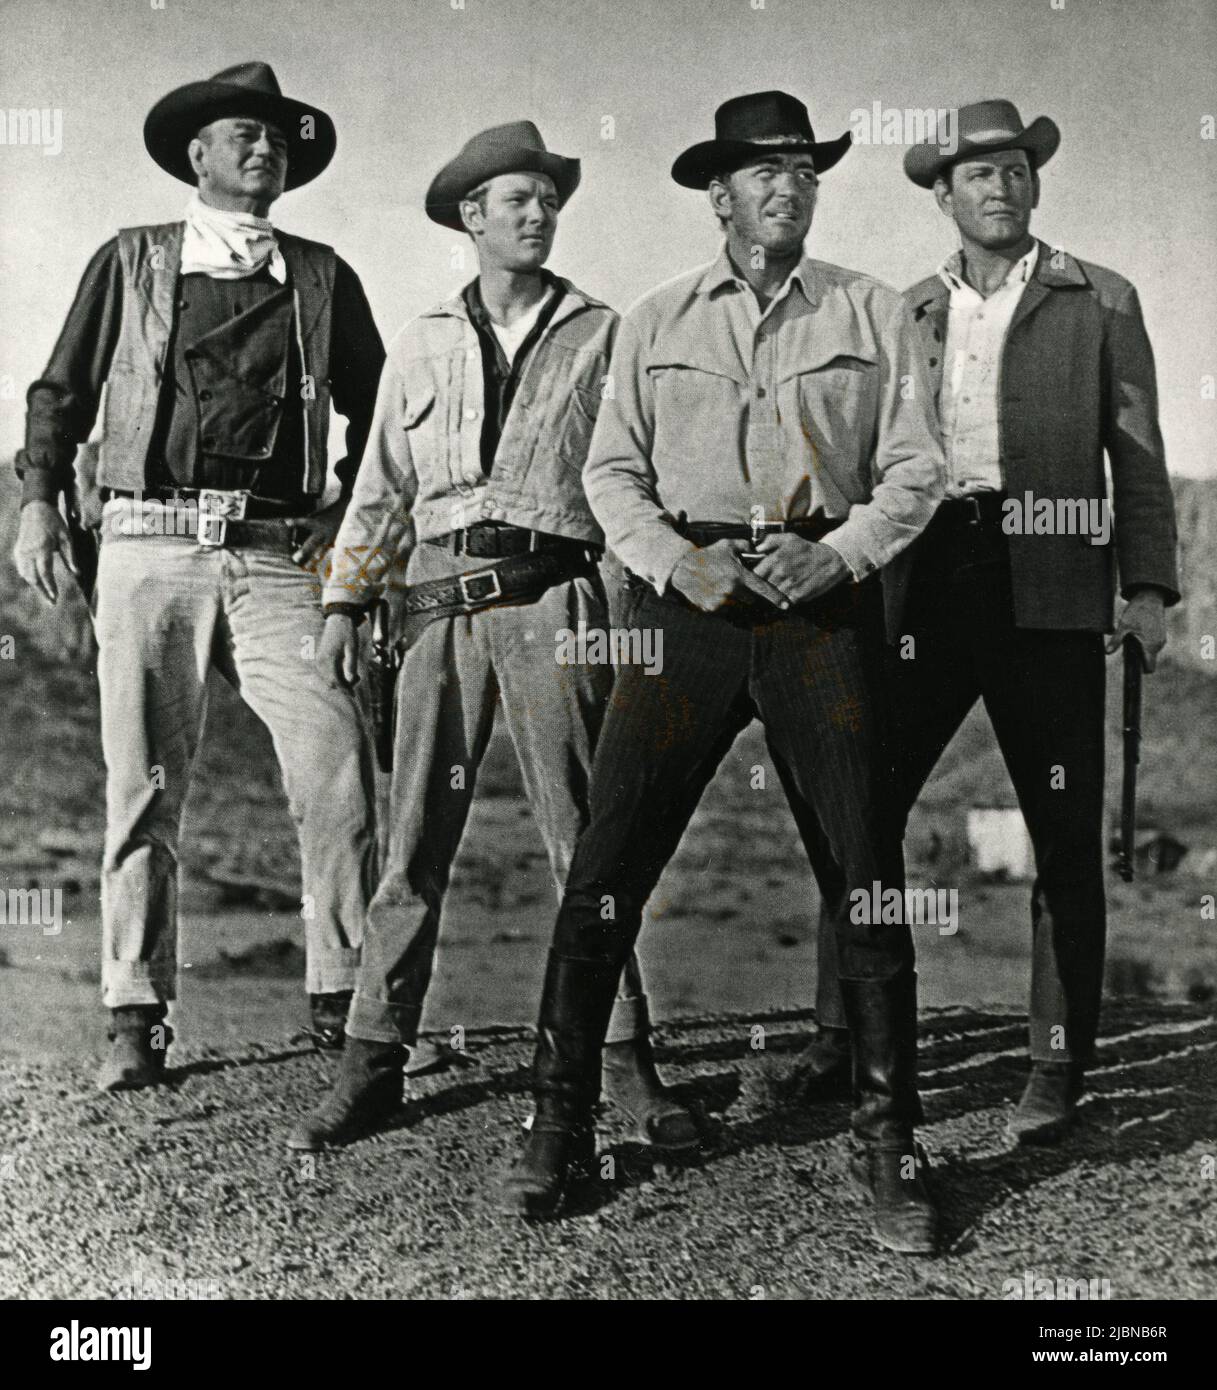 American actors John Wayne, Michael Anderson Jr., Dean Martin, and Earl Holliman in the movie The Sons of Katie Elder, USA 1965 Stock Photo